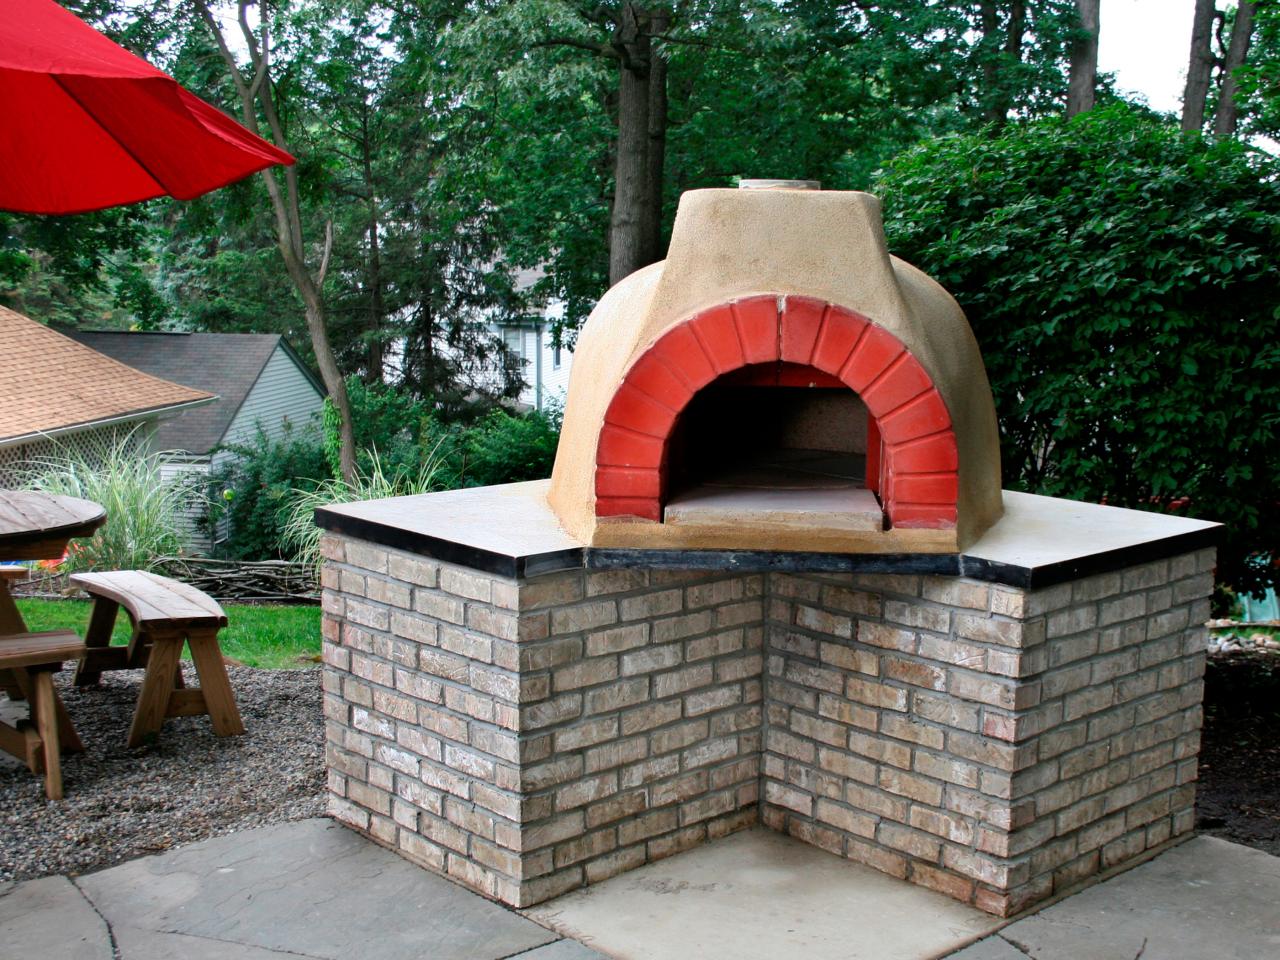 How To Build An Outdoor Pizza Oven, Outdoor Brick Oven Pizza